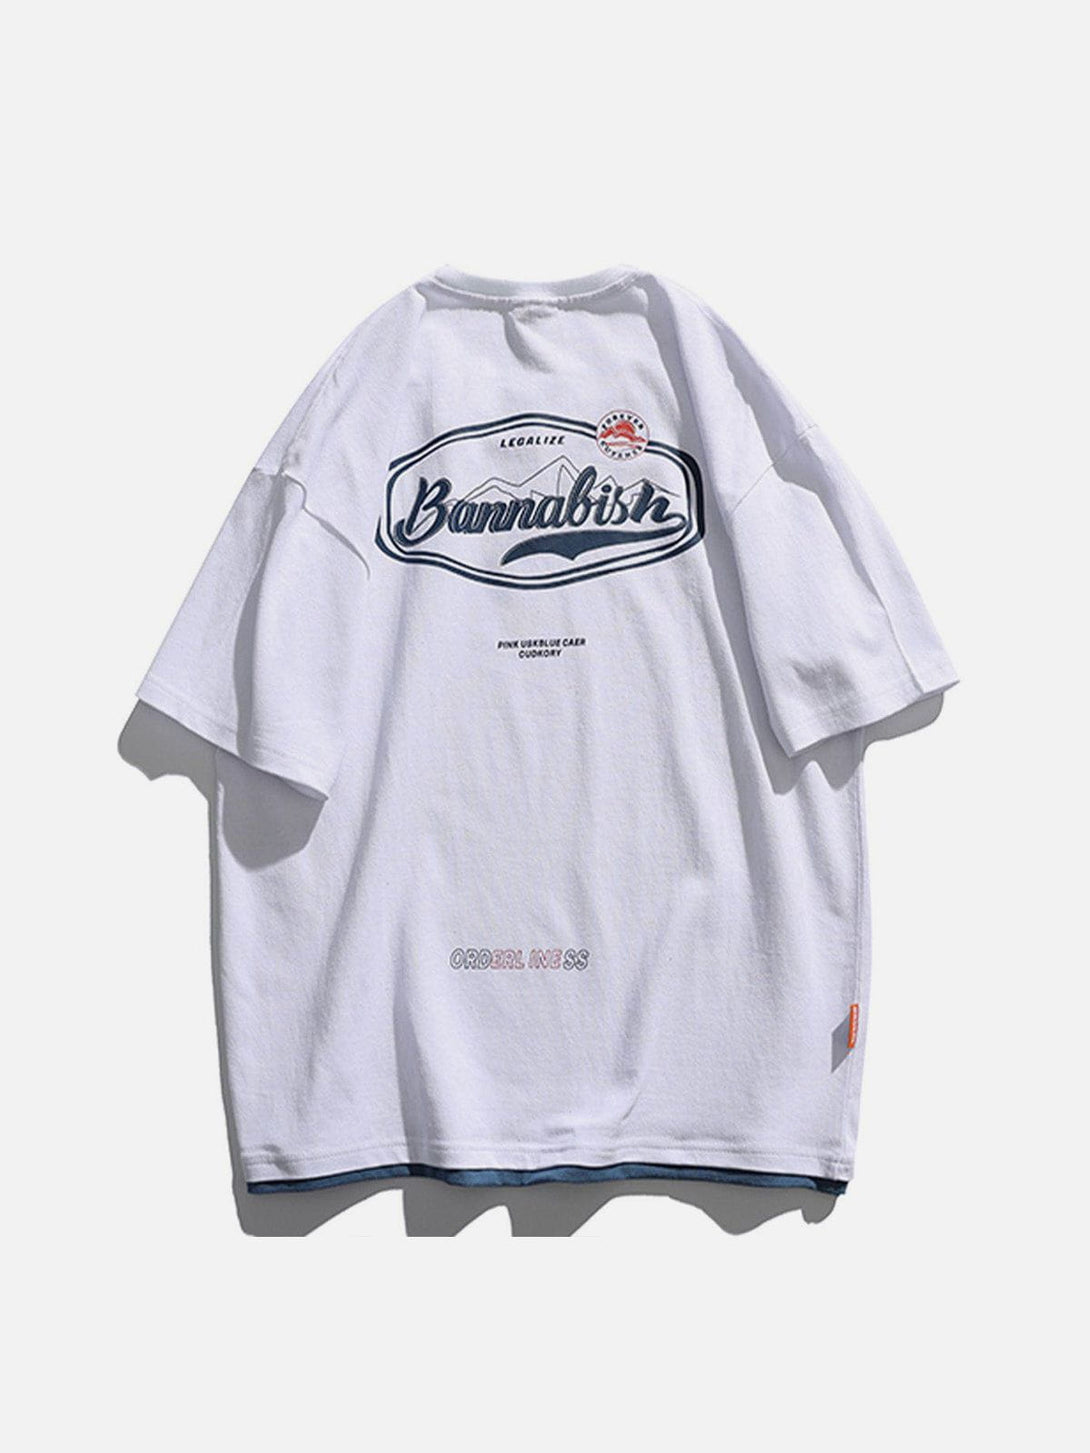 Majesda® - Small Mountains Letter Graphic Tee- Outfit Ideas - Streetwear Fashion - majesda.com